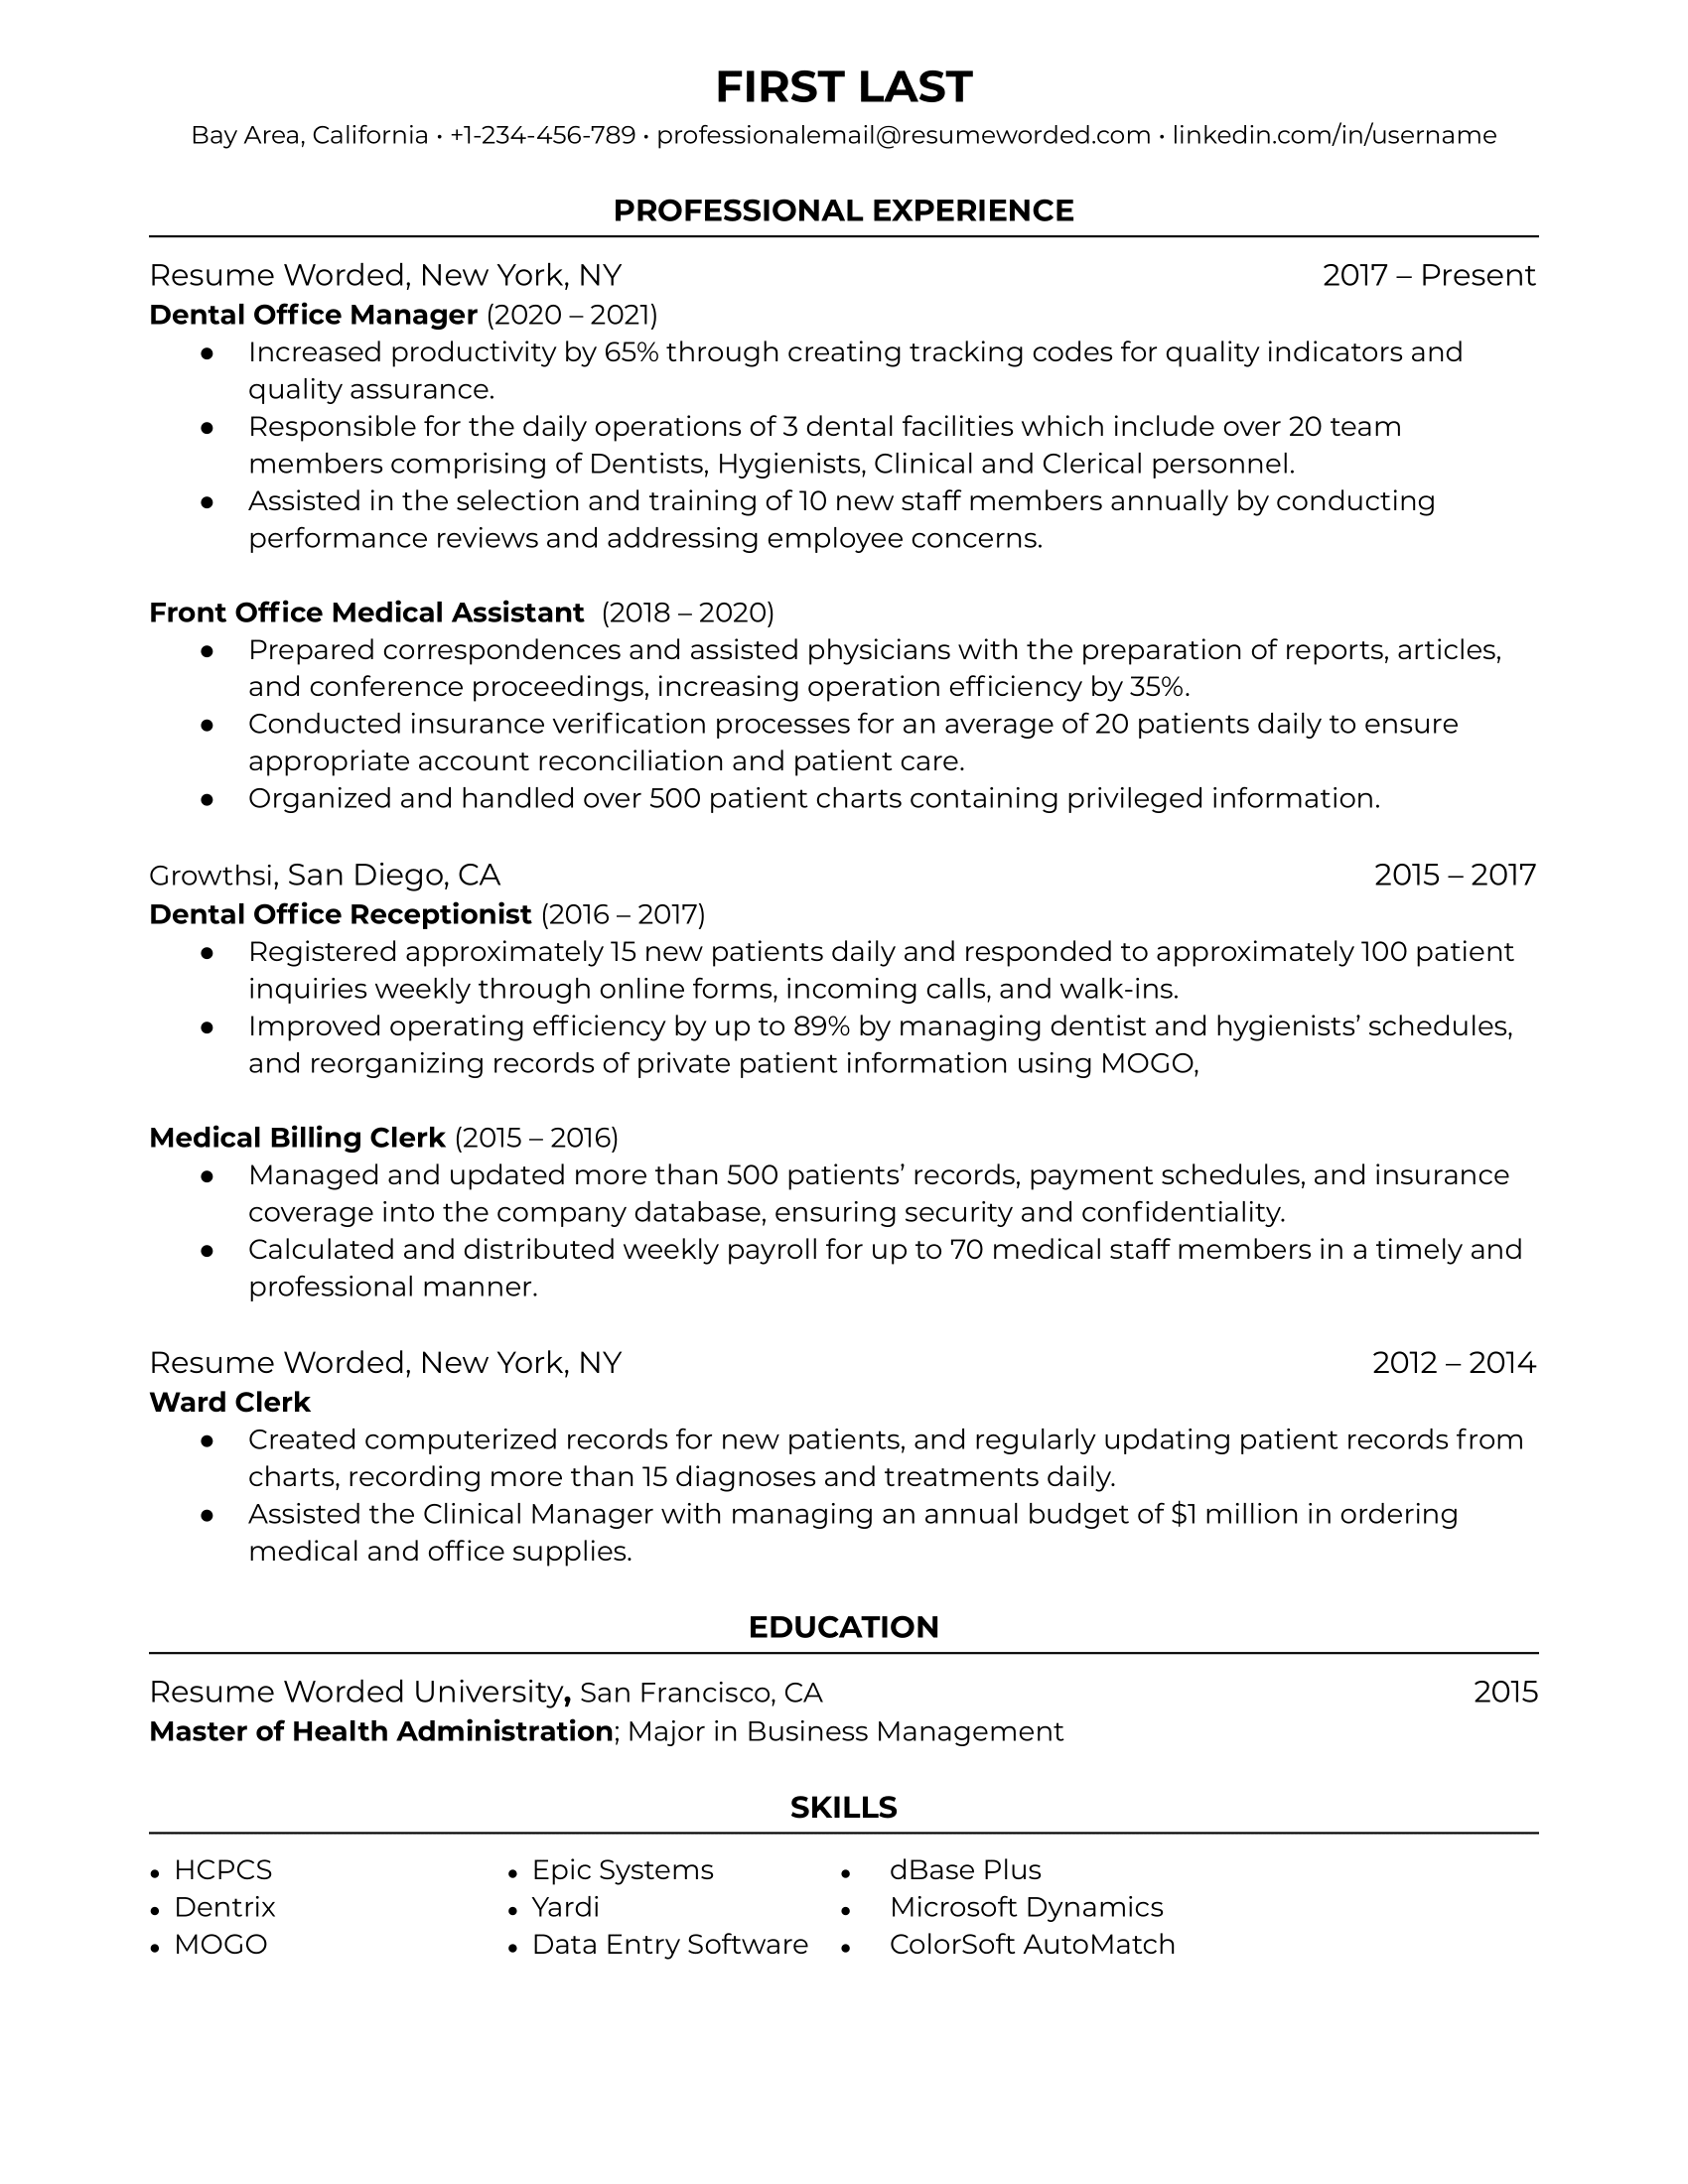 Dental Office Manager resume highlighting software proficiency and patient relations experience.